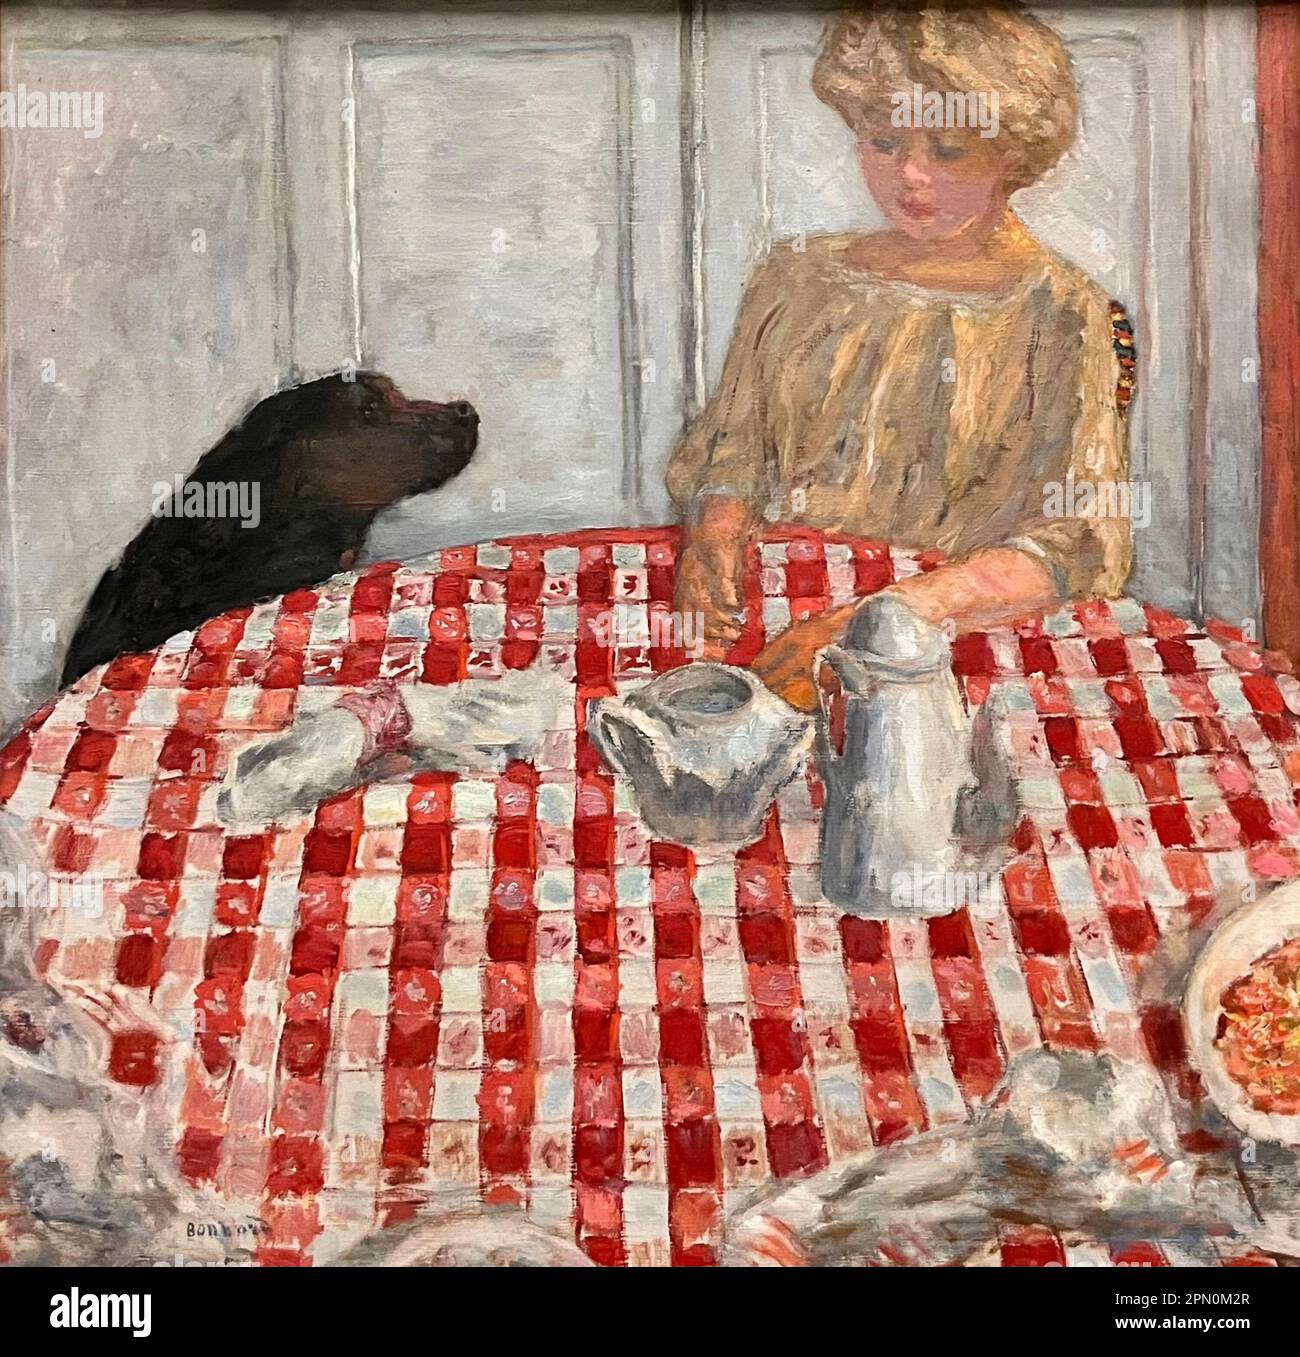 The red checkered table cloth or Dog at breakfast by Pierre Bonnard from 1910. painted by the French post-impressionist painter Pierre Bonnard Stock Photo